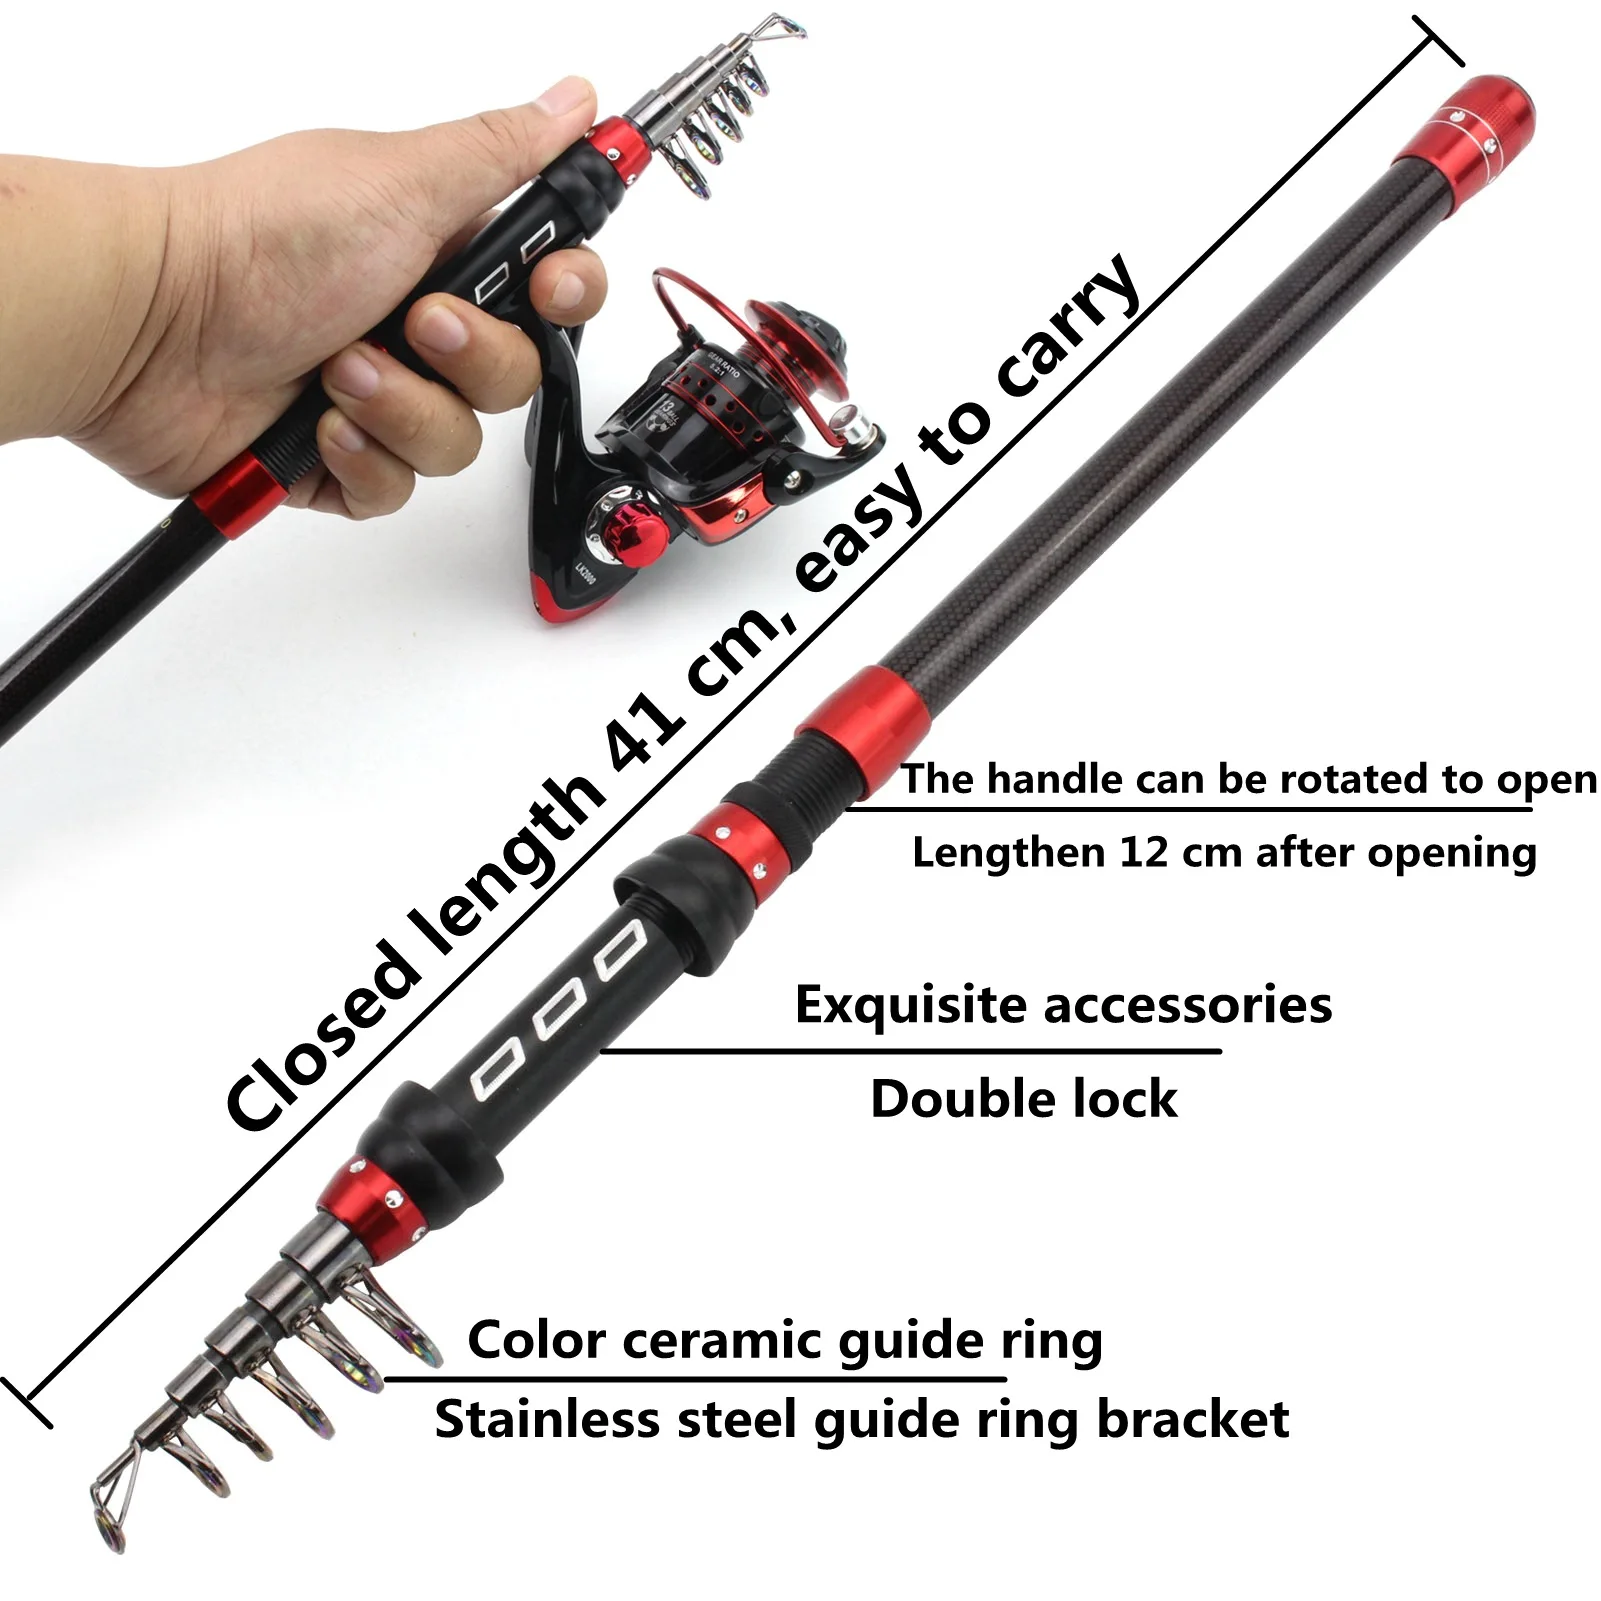 Telescopic Fishing Rod and Reel Combo 1.8-3.6m Carbon Fiber Ultralight 5:2:1 Reel Spinning Casting Sea Fishing Pole Accessories enlarge